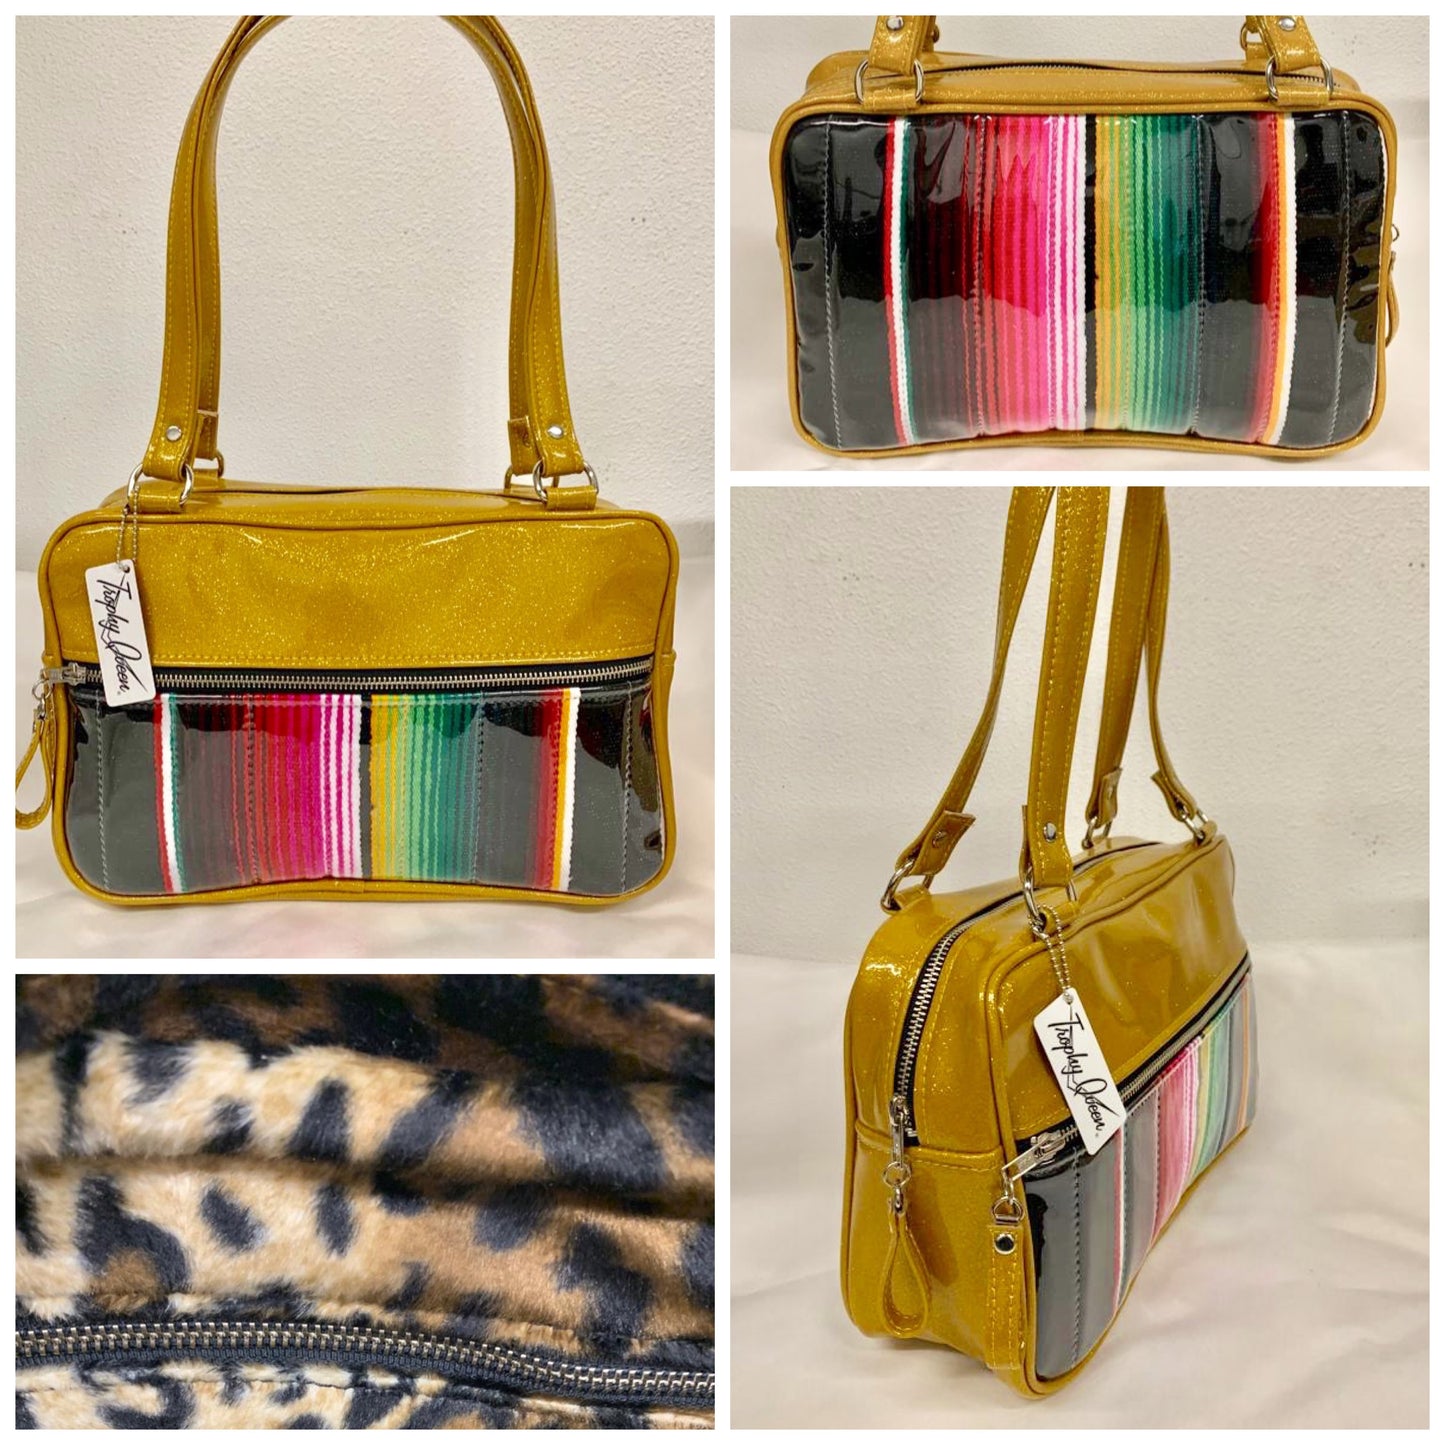 Fairlane Tote Bag in Genuine Mexican Blanket with Clear Overlay and Marigold Glitter Vinyl with plush Leopard Lining. This purse has matching vinyl zipper pull, nickel feet, inside zipper pocket with serial number and open divided pocket with signature Trophy Queen label. The straps are approximately 25” and come with an extra set of replacement straps. Locally made and ships from California.